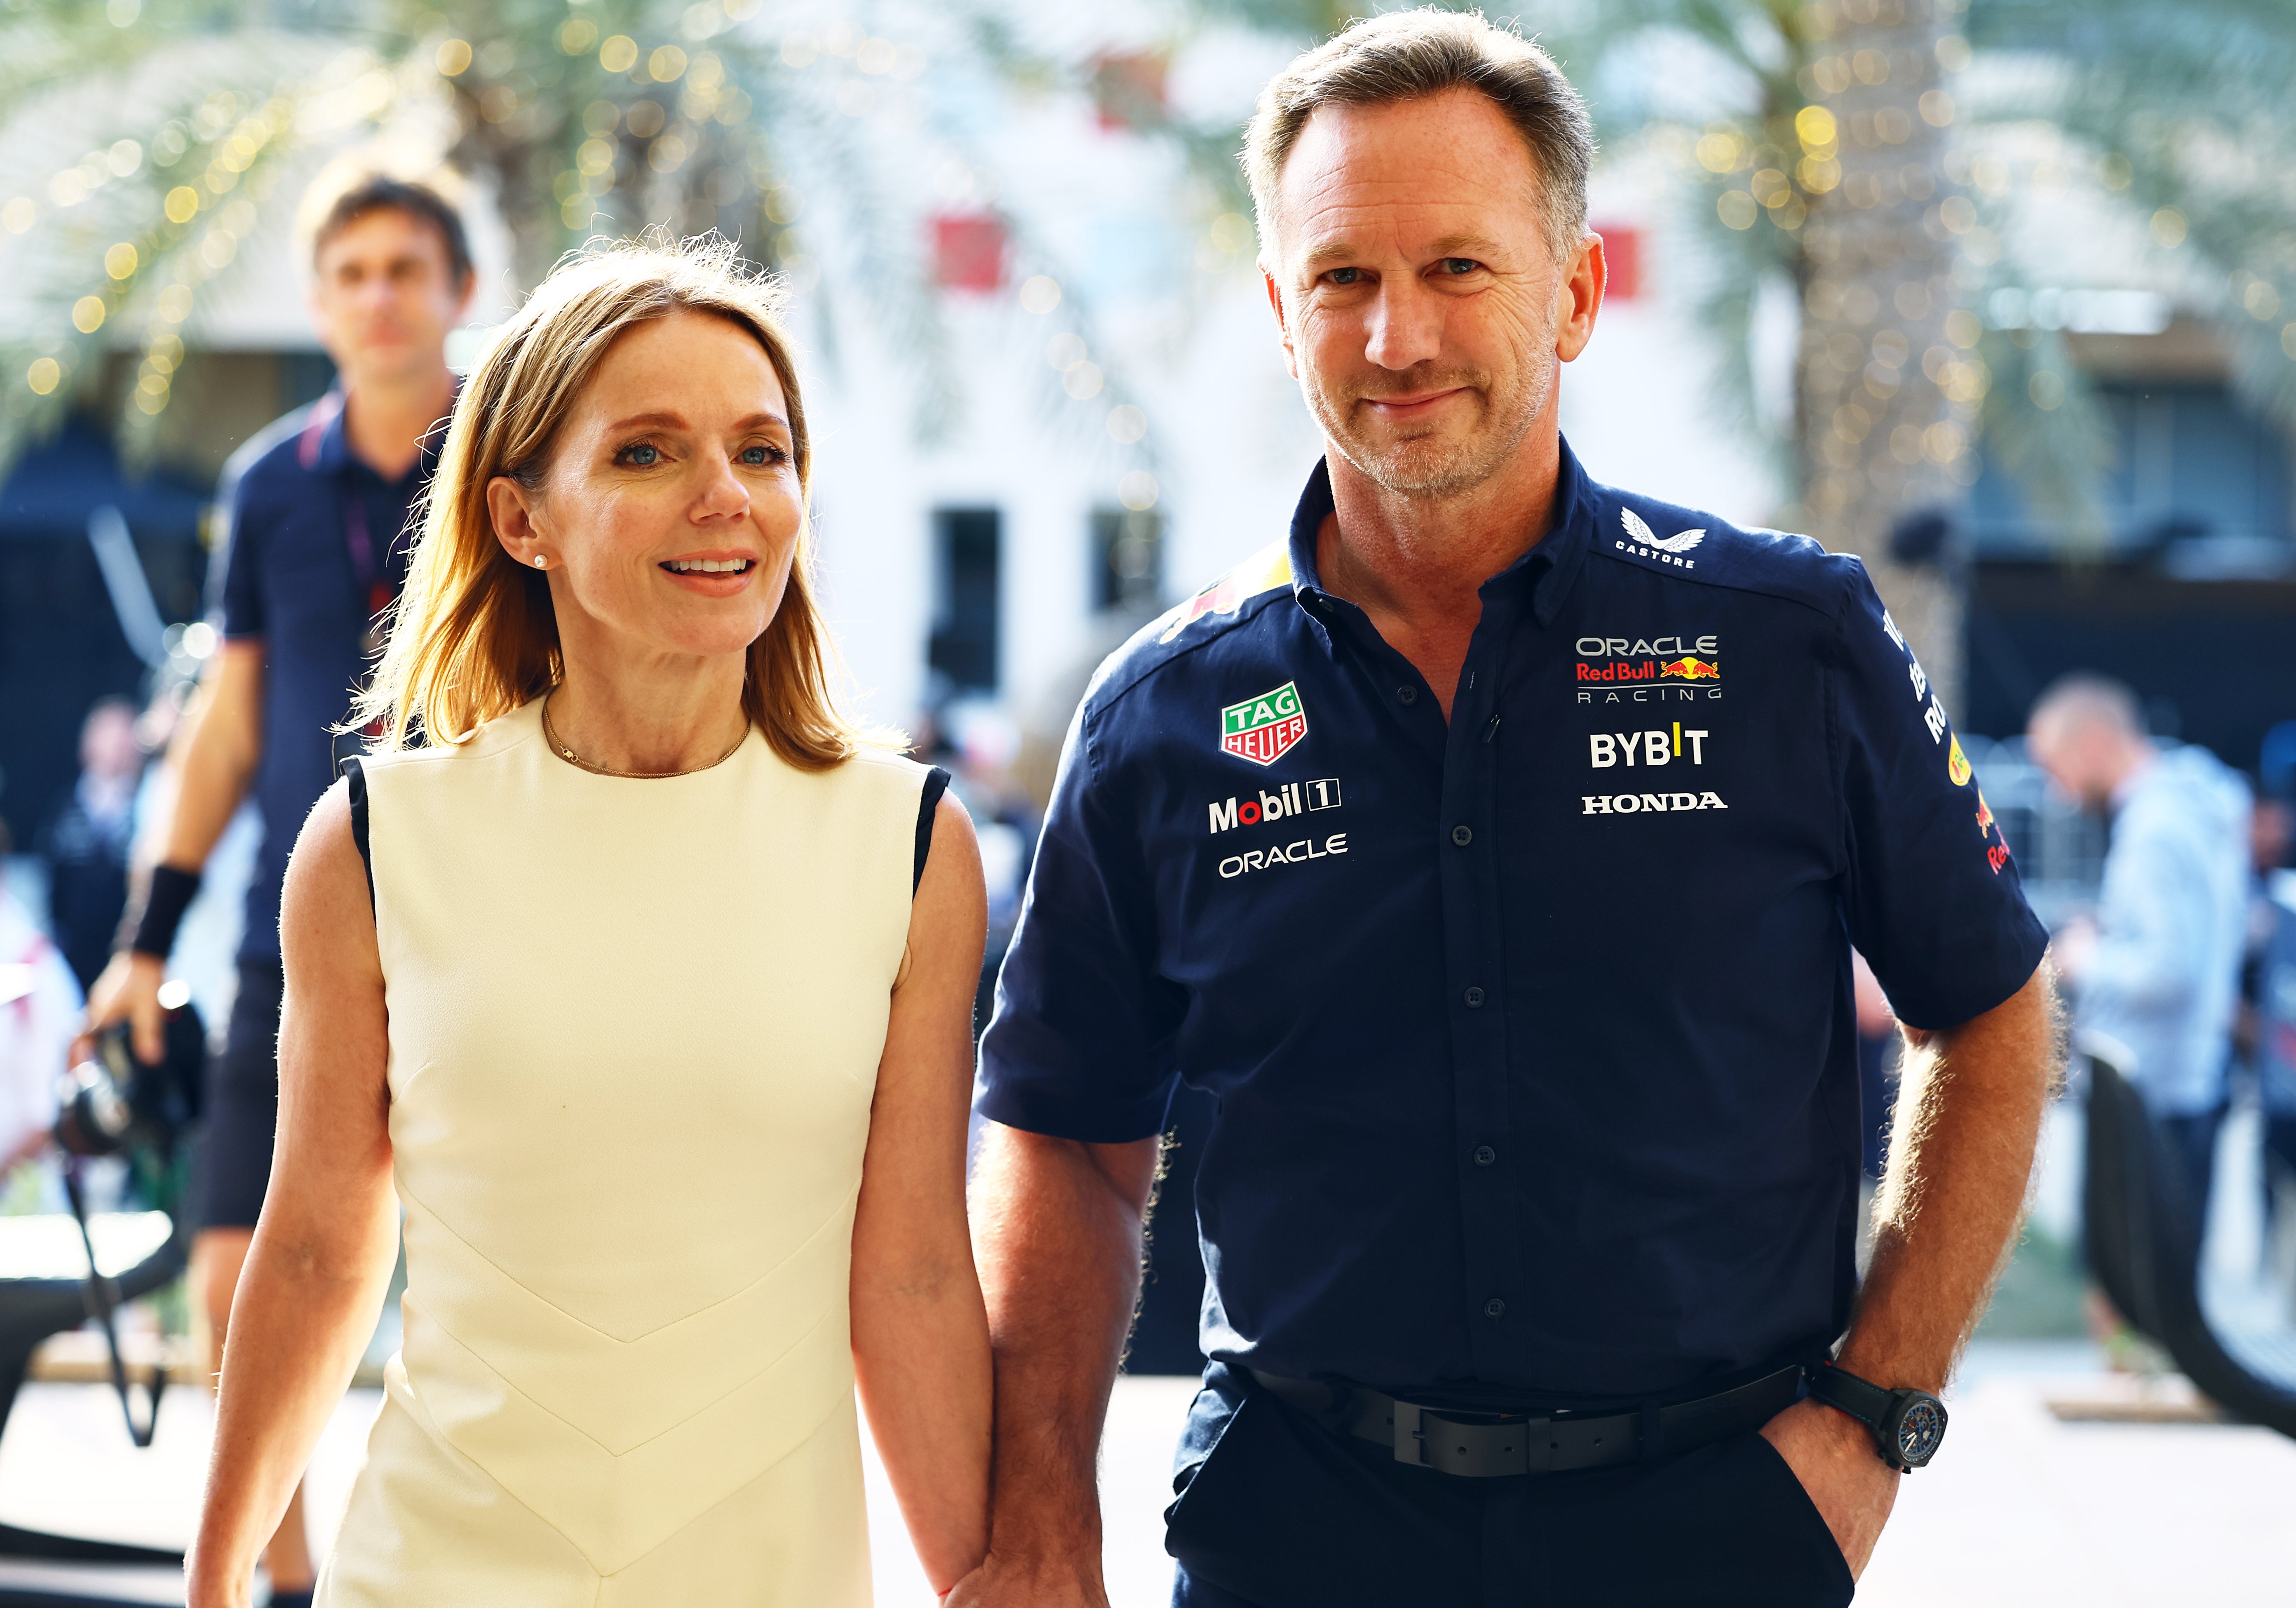 Christian Horner was hand-in-hand with wife Geri Halliwell at the Bahrain Grand Prix on Saturday